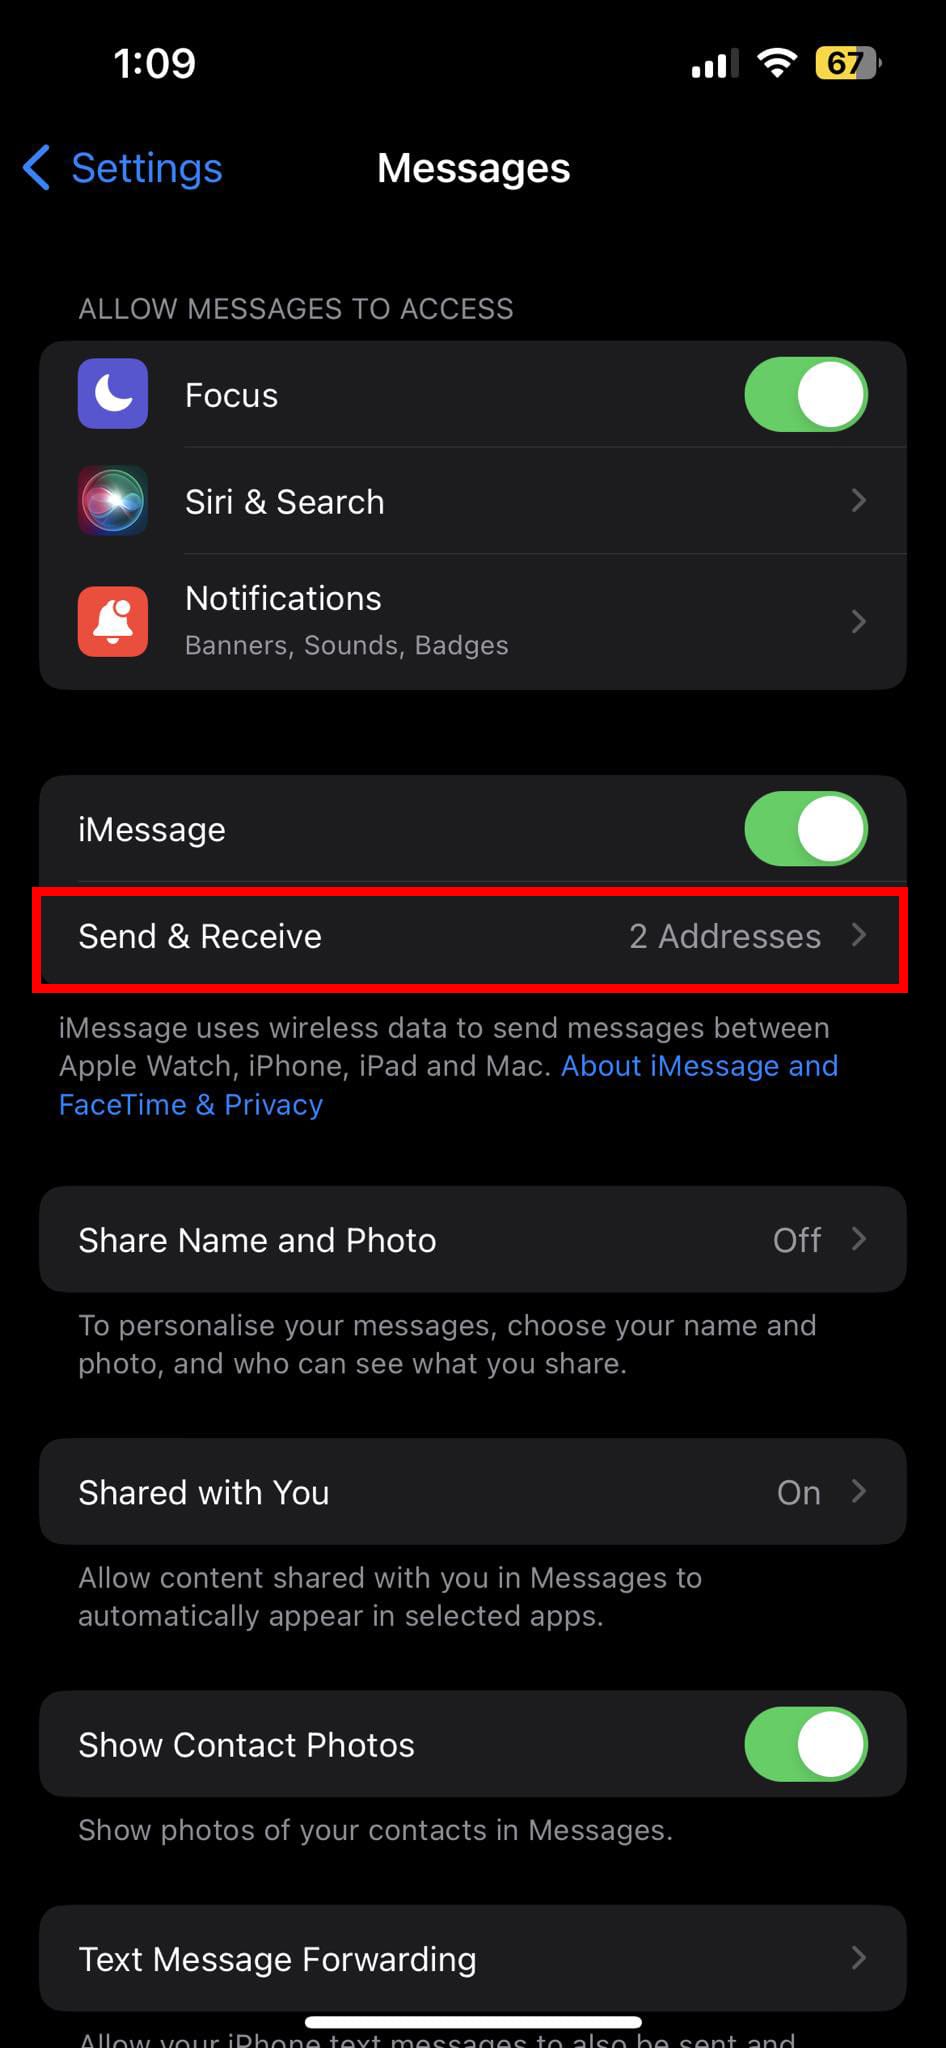 Send & receive on iPhone